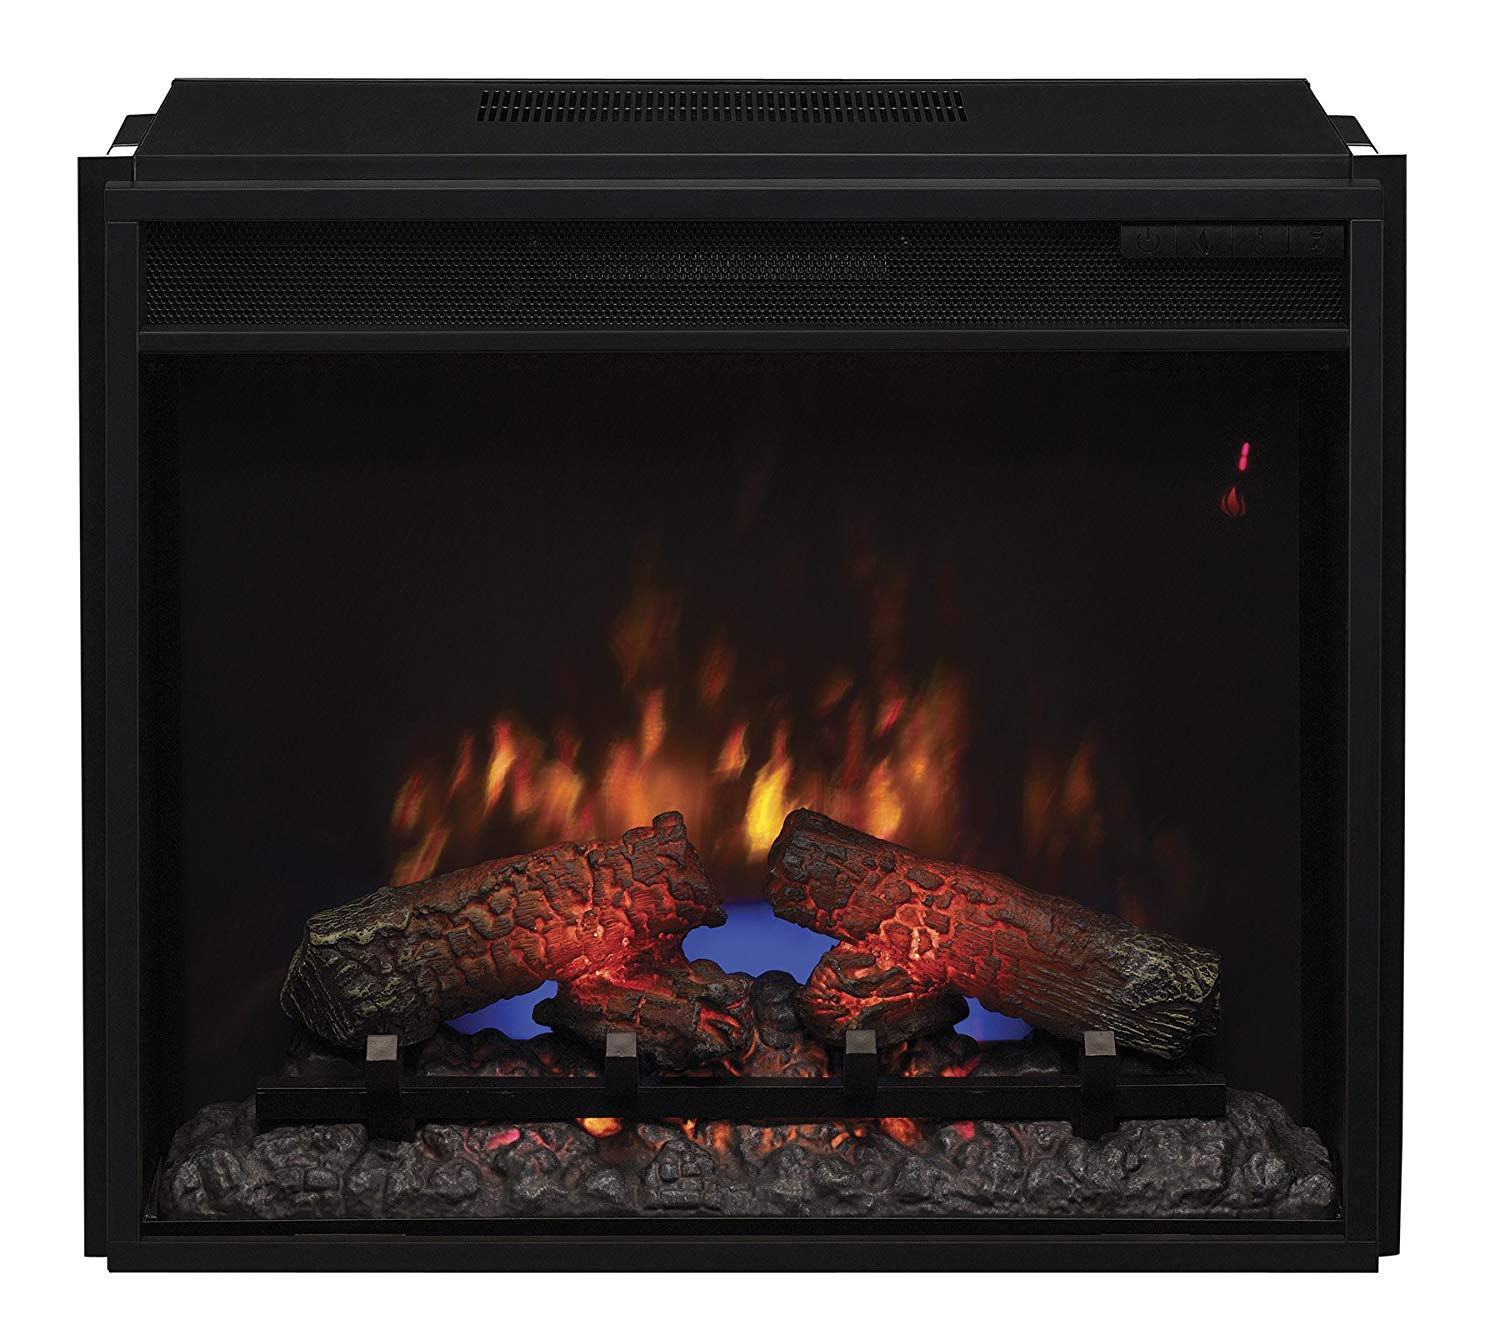 50 Inch Electric Fireplace Insert Best Of Classicflame 23ef031grp 23" Electric Fireplace Insert with Safer Plug